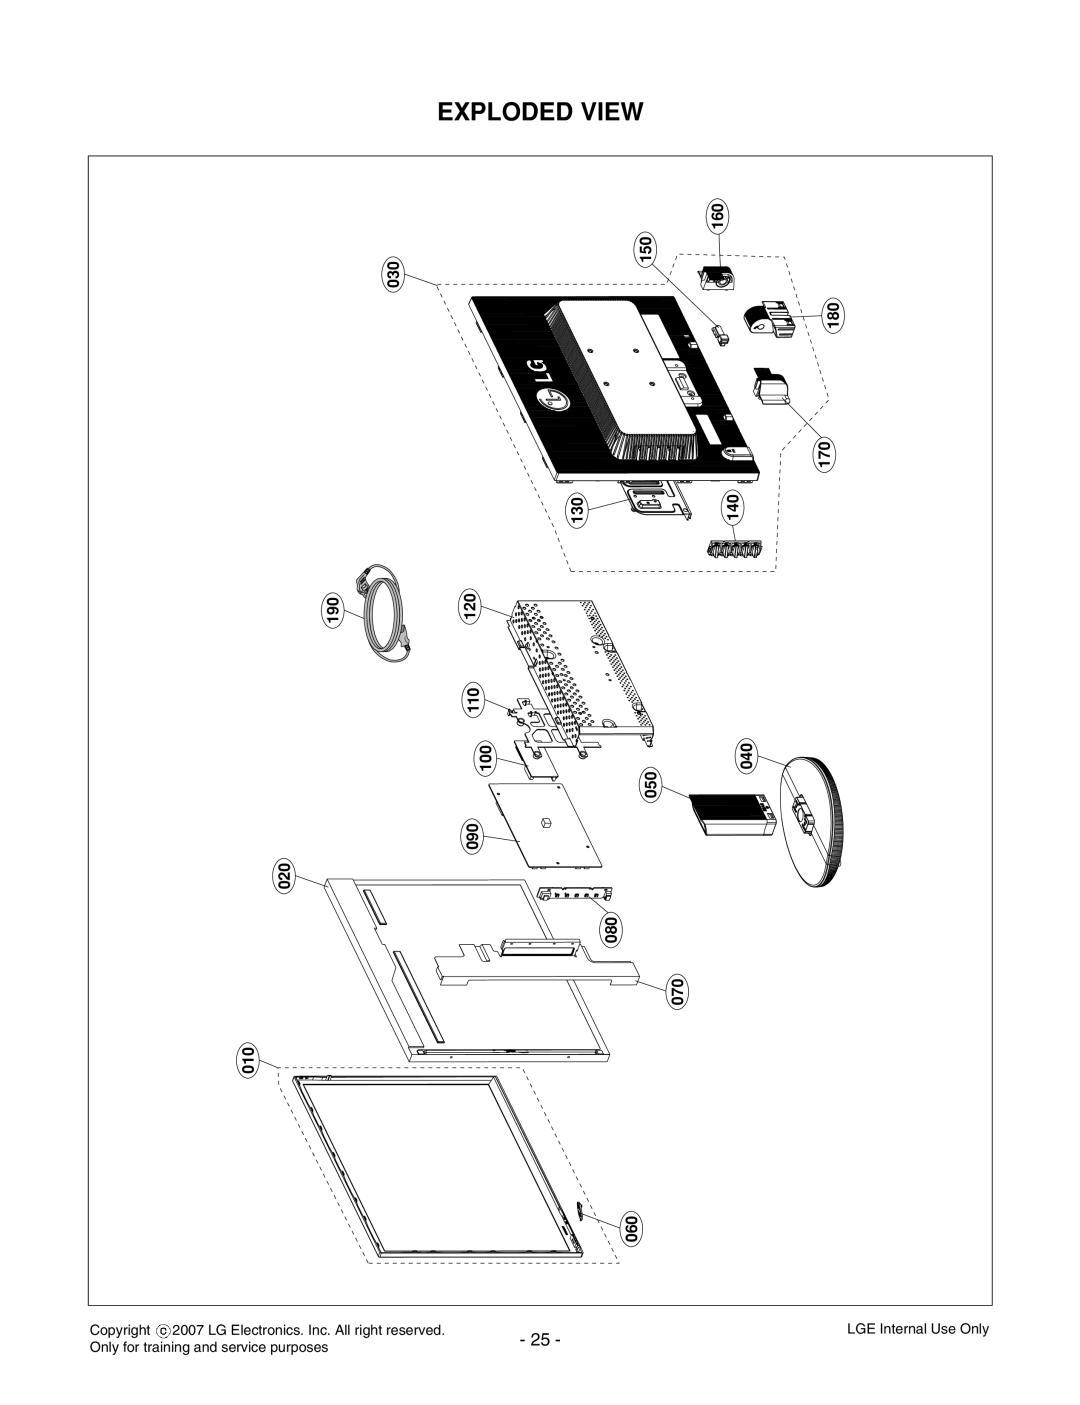 LG Electronics L1733TR, L1933TR service manual Exploded View, LGE Internal Use Only, Only for training and service purposes 